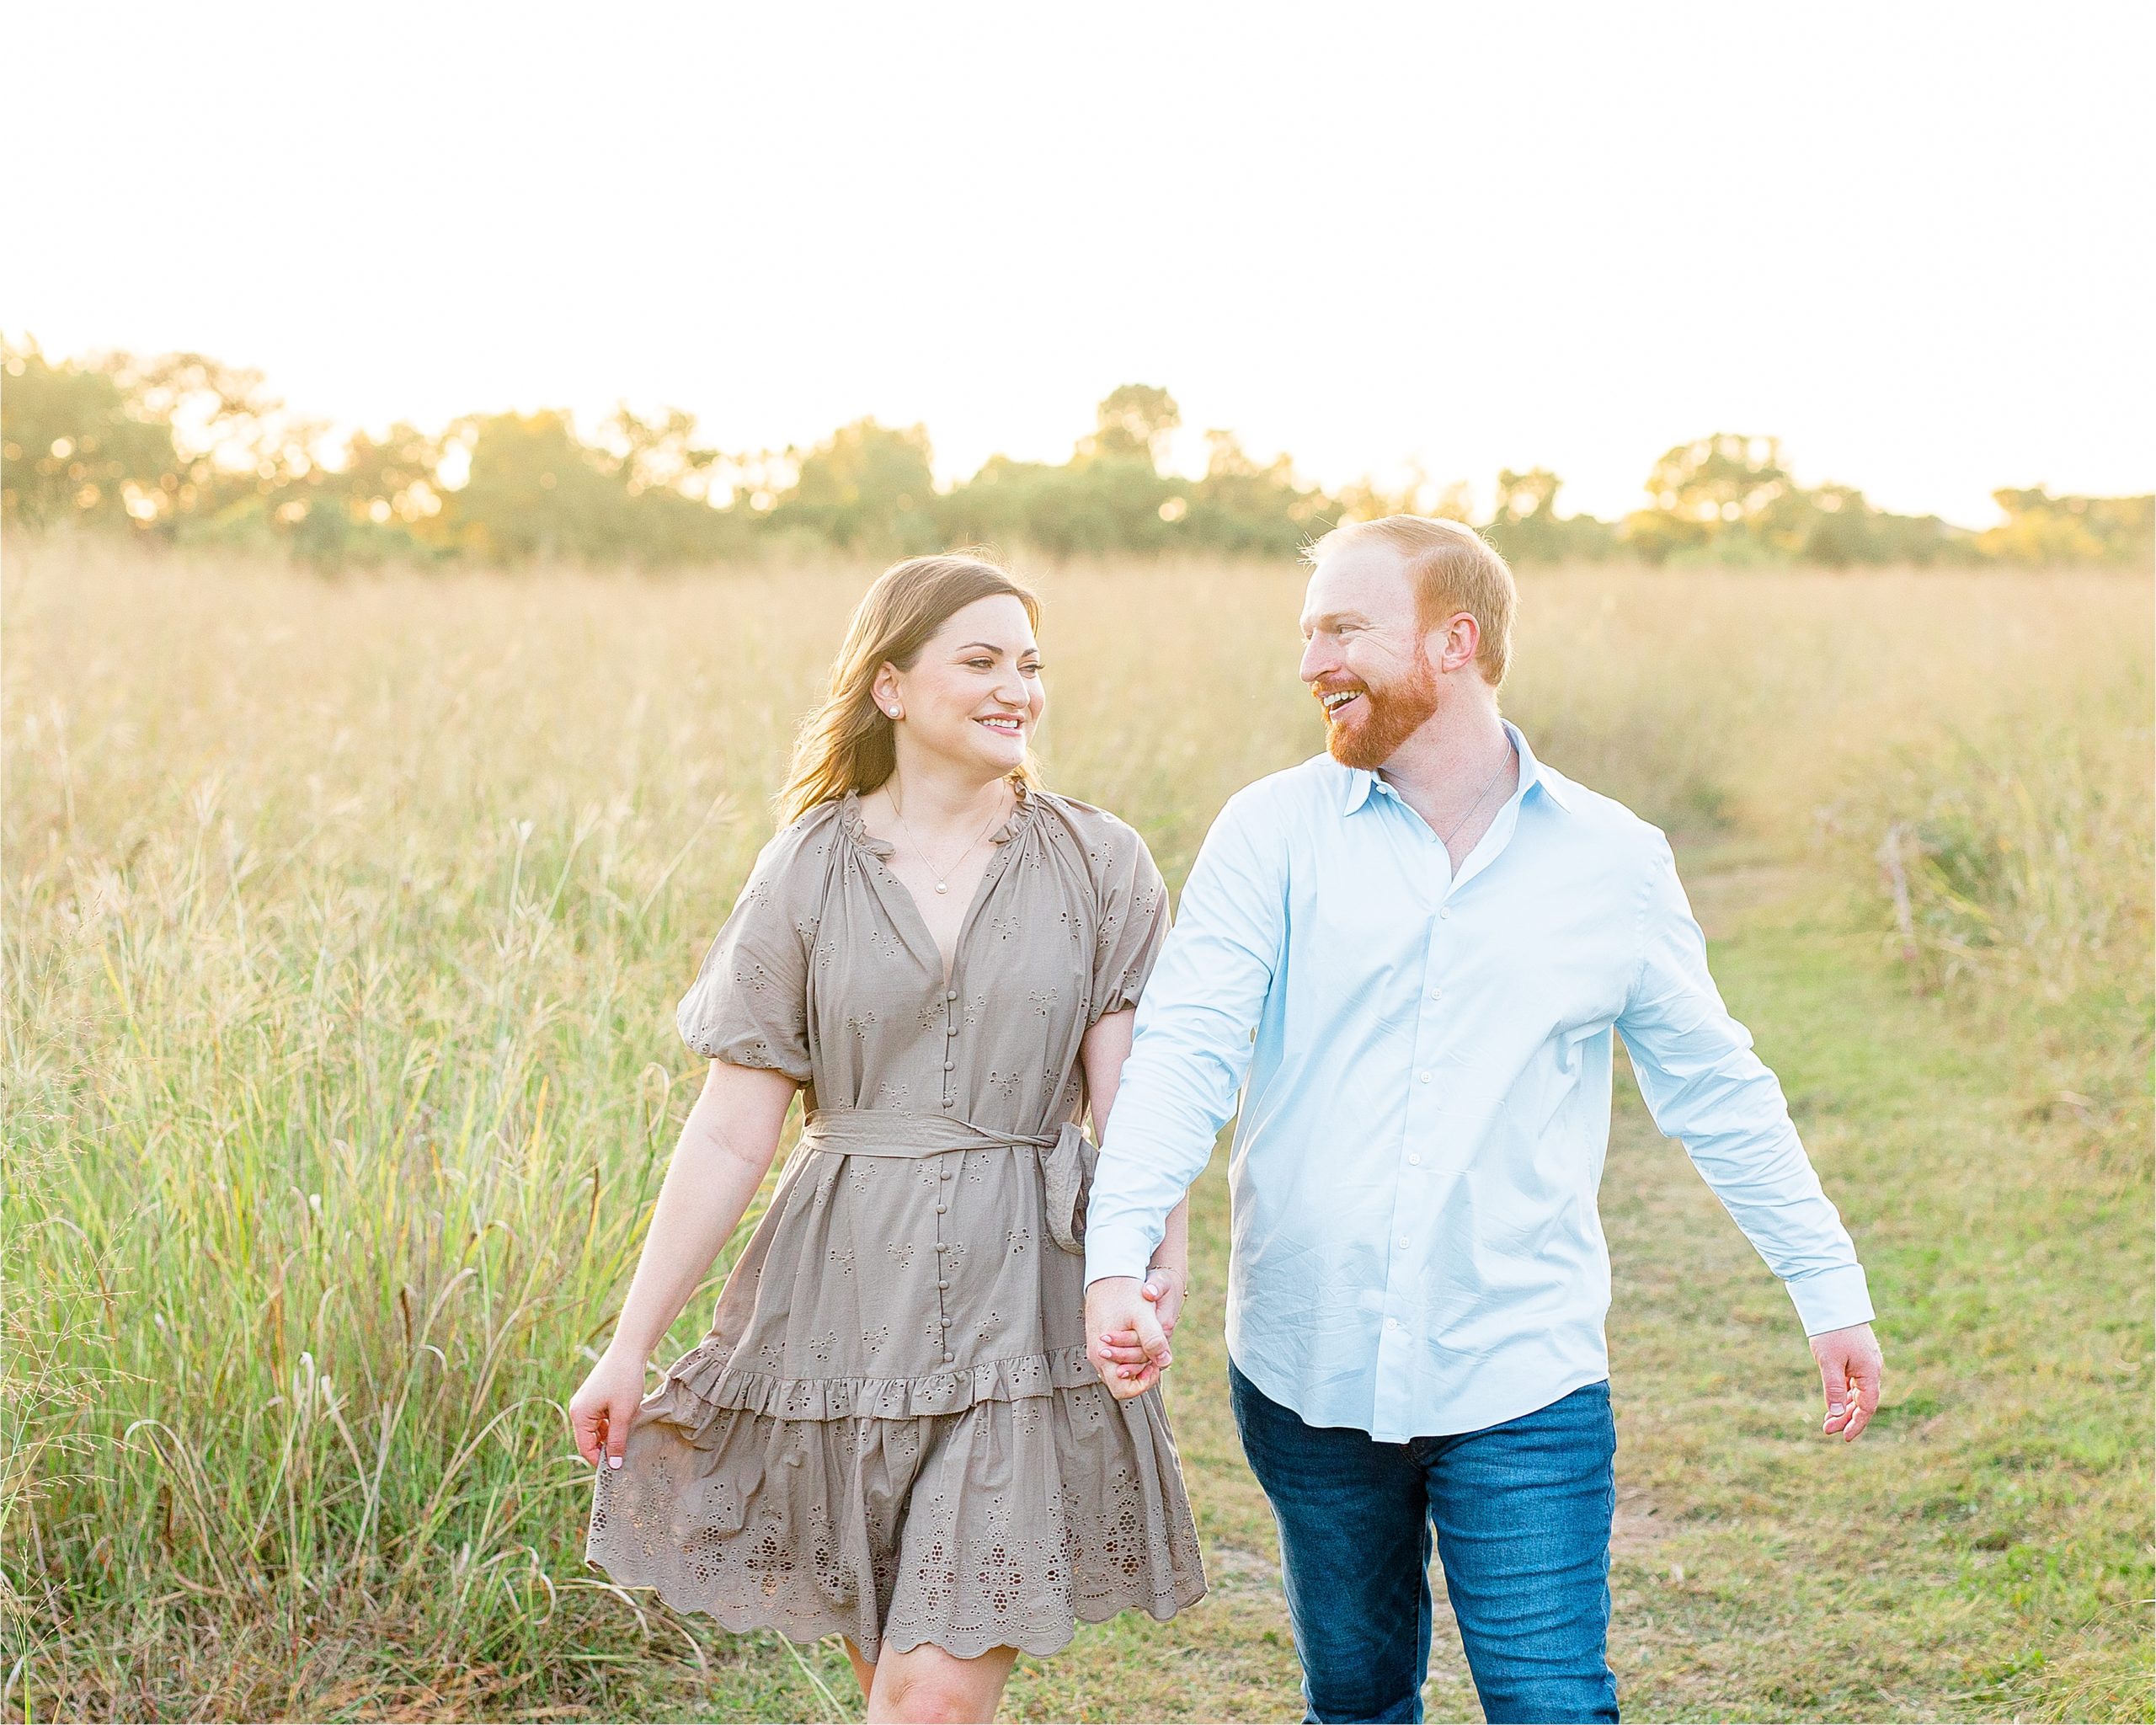 An engaged couple holds hands and laughs in a field at sunset during their portrait session in San Antonio, Texas